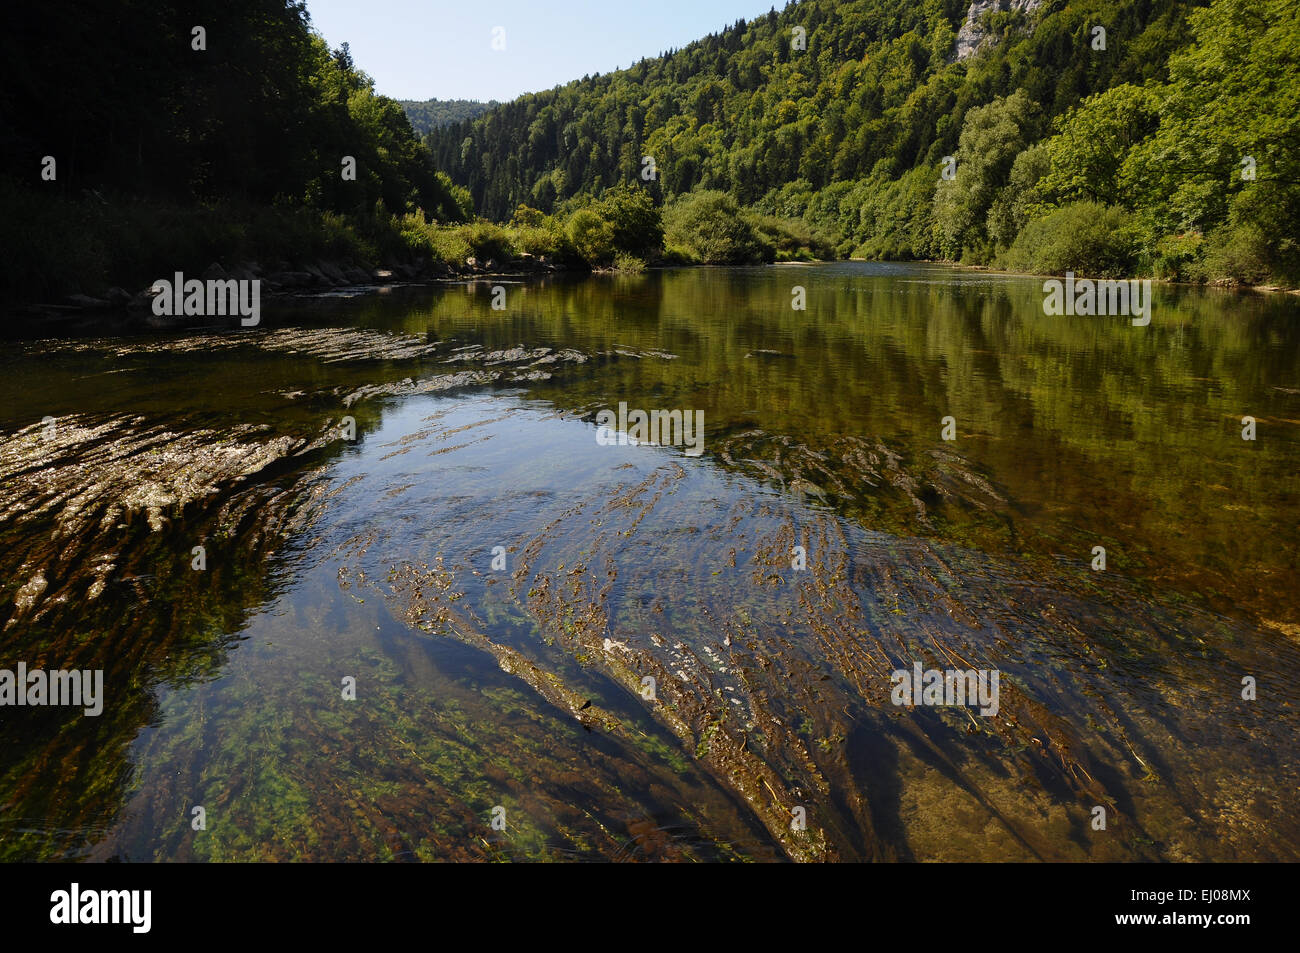 Switzerland, Europe, Jura, Doubs, river, flow, Clos du Doubs, Les Pommerats, Moulin Jeannotat, wood, forest, border, country bord Stock Photo